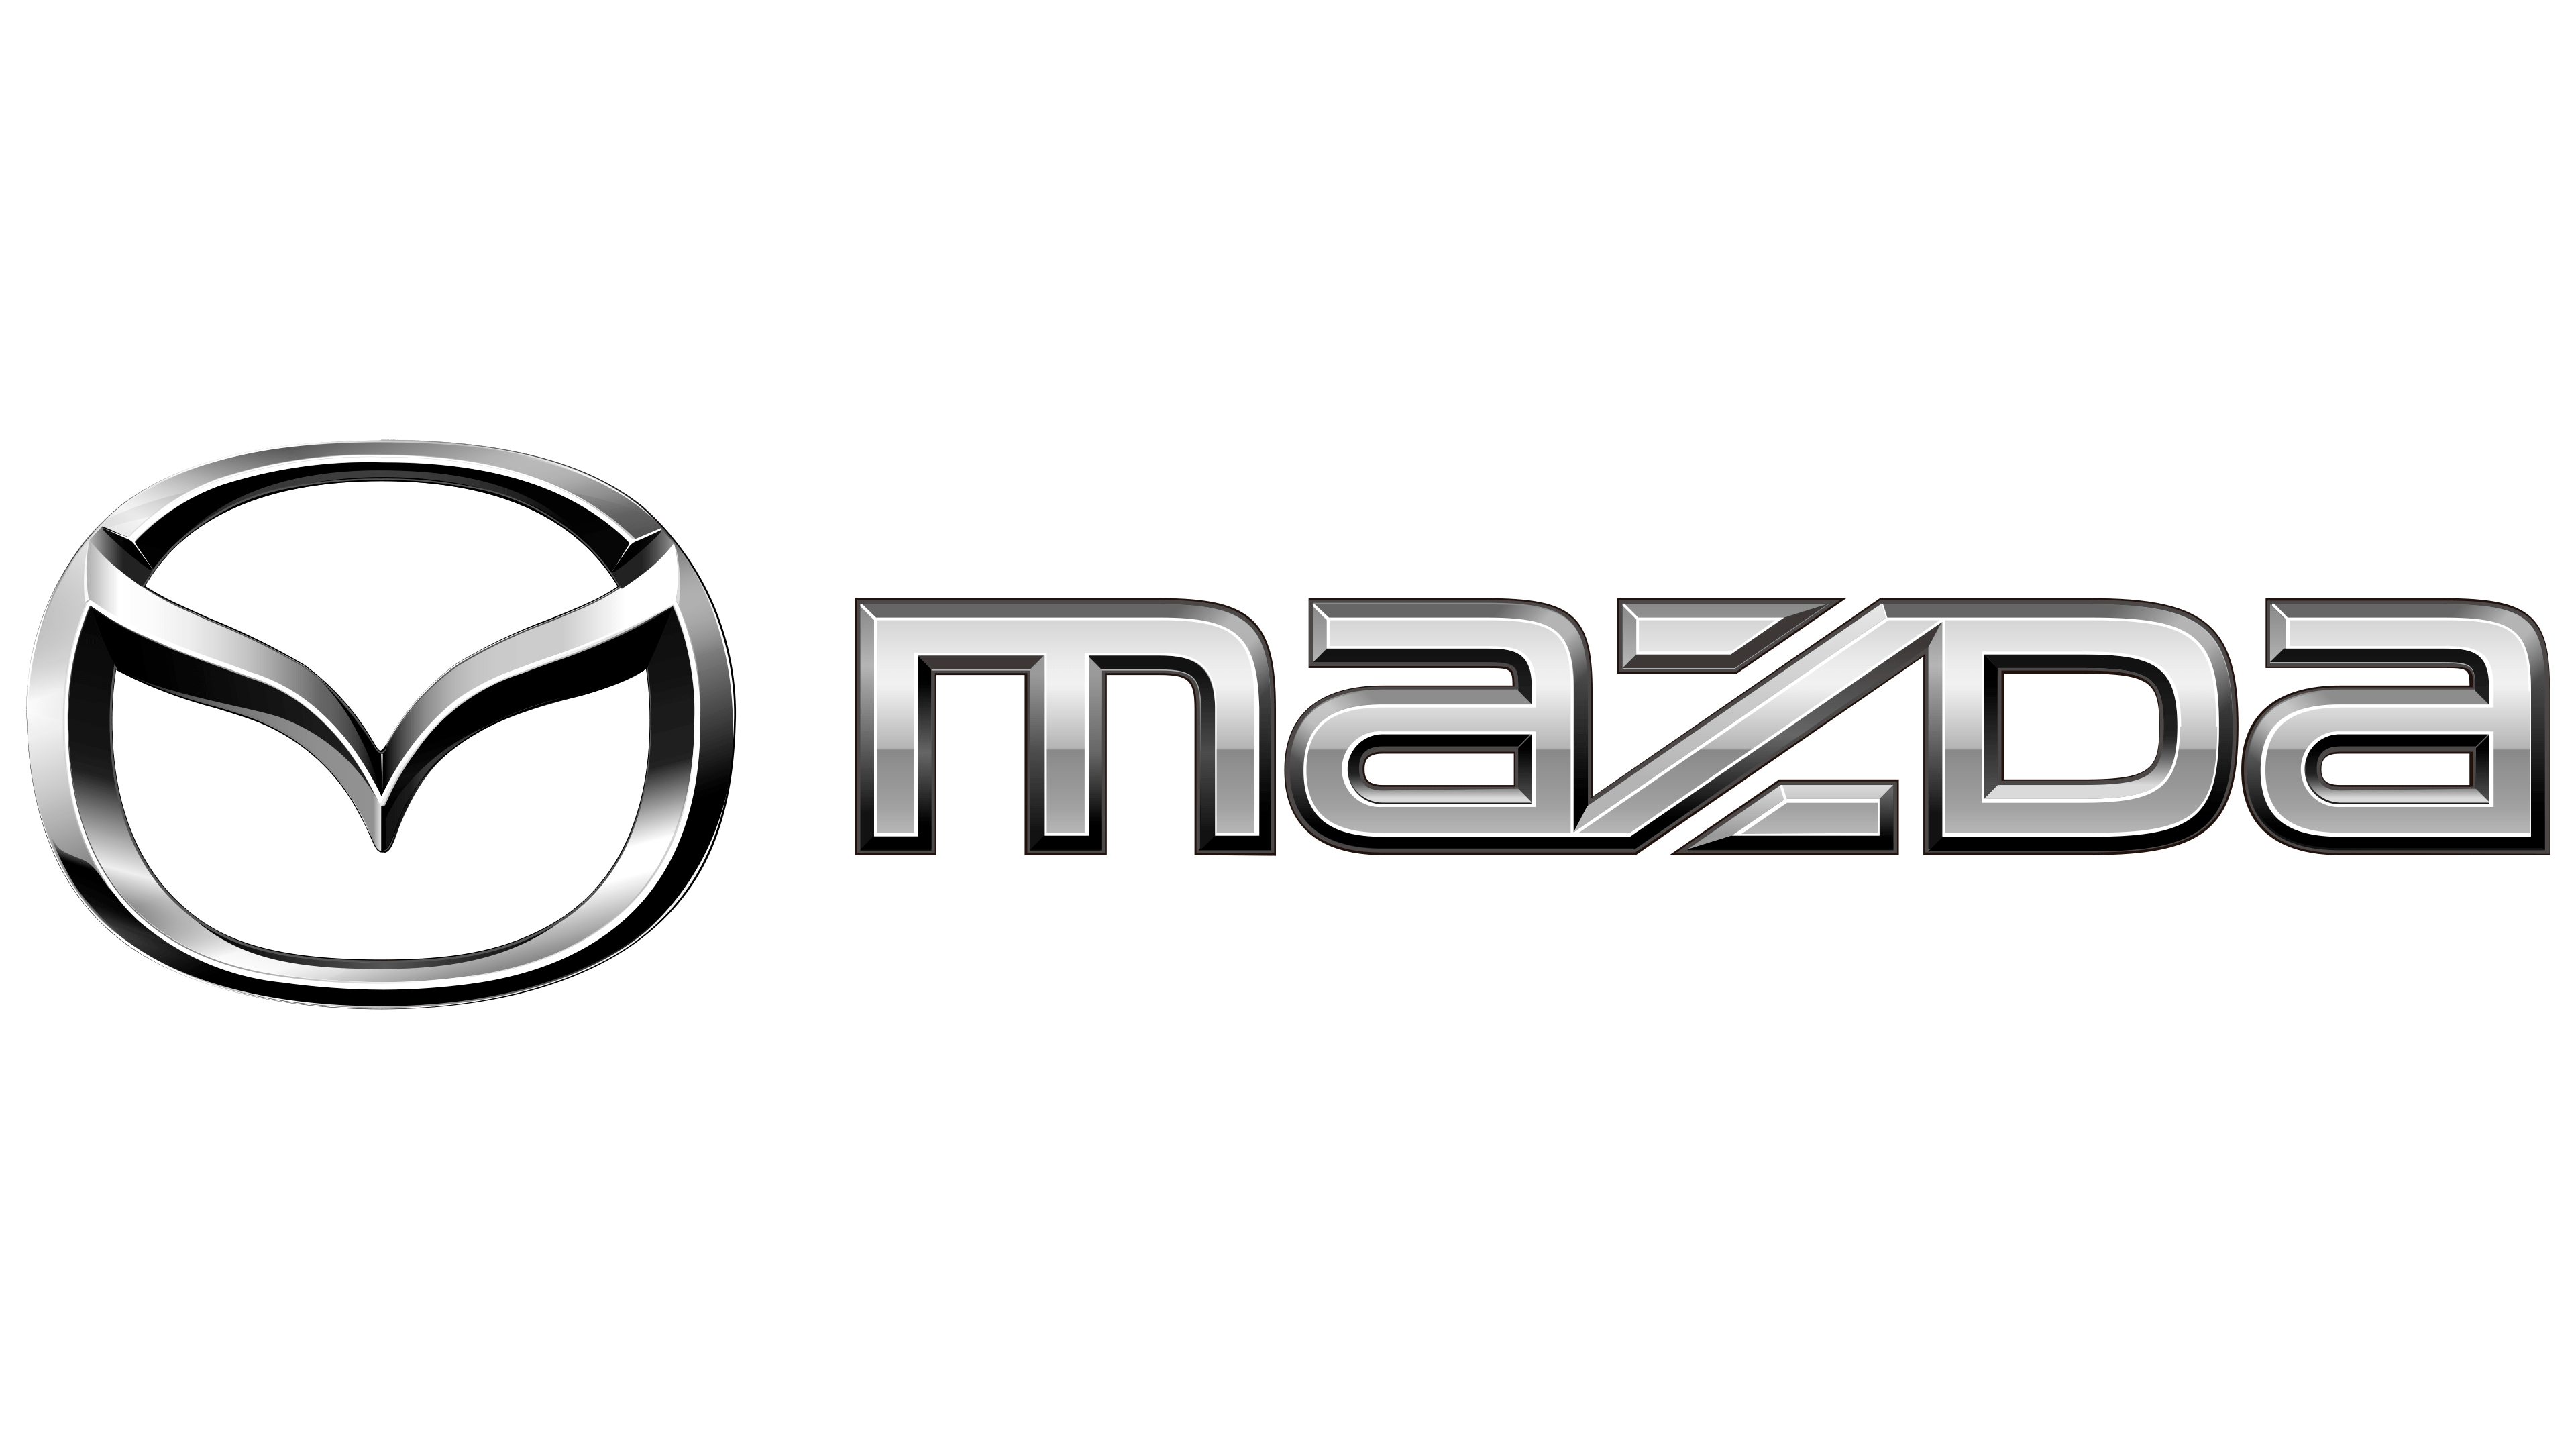 Mazda Most Reliable Car Brand